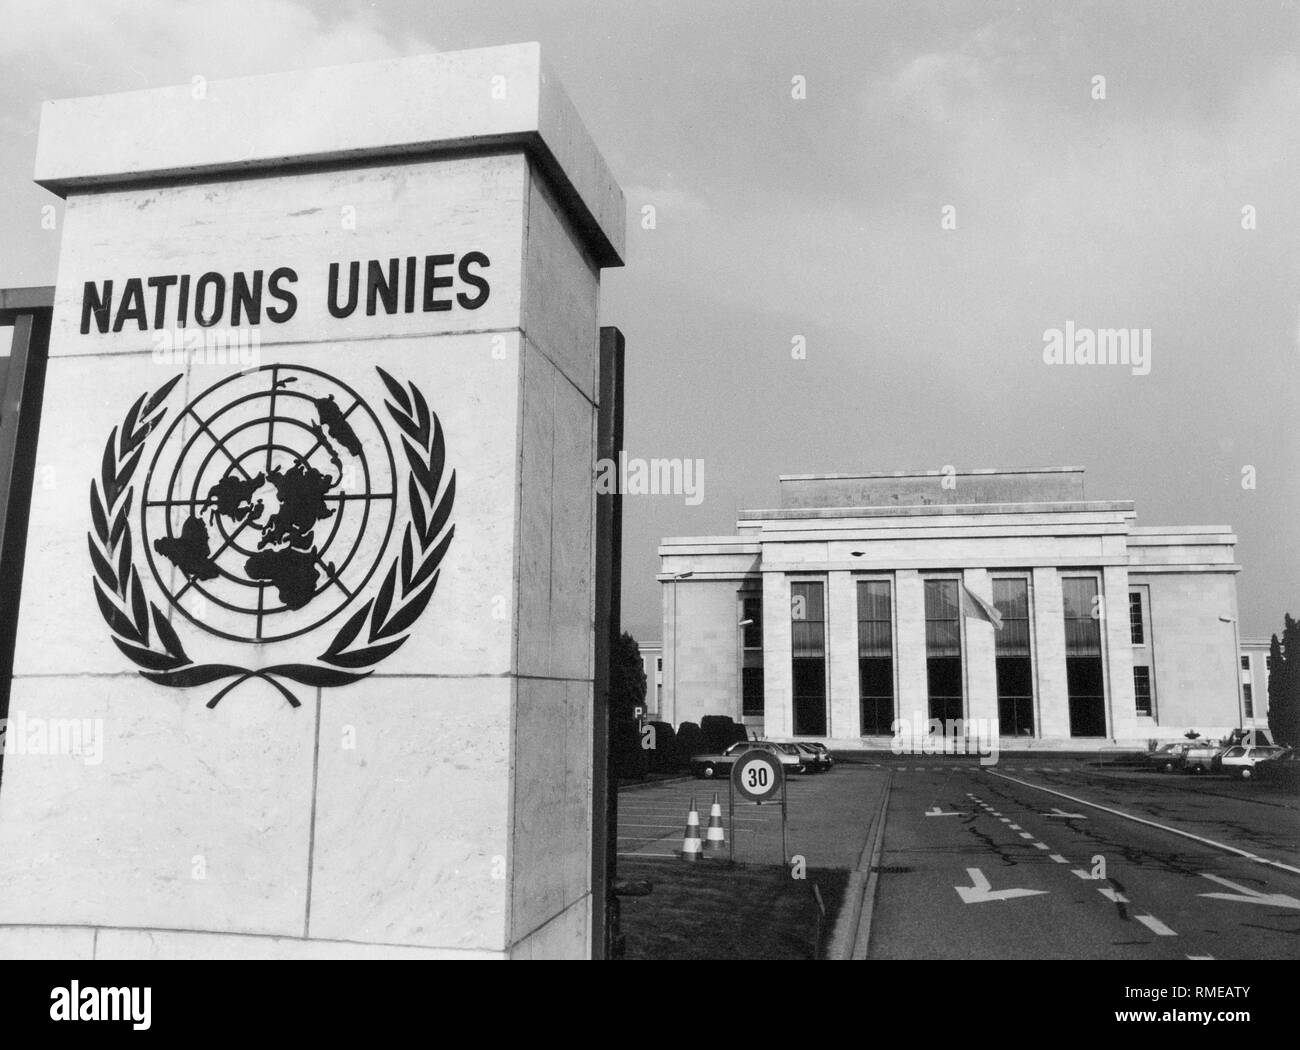 The Palais des Nations (Palace of Nations) in the Avenue de la Paix, headquarters of the United Nations in Geneva. Stock Photo